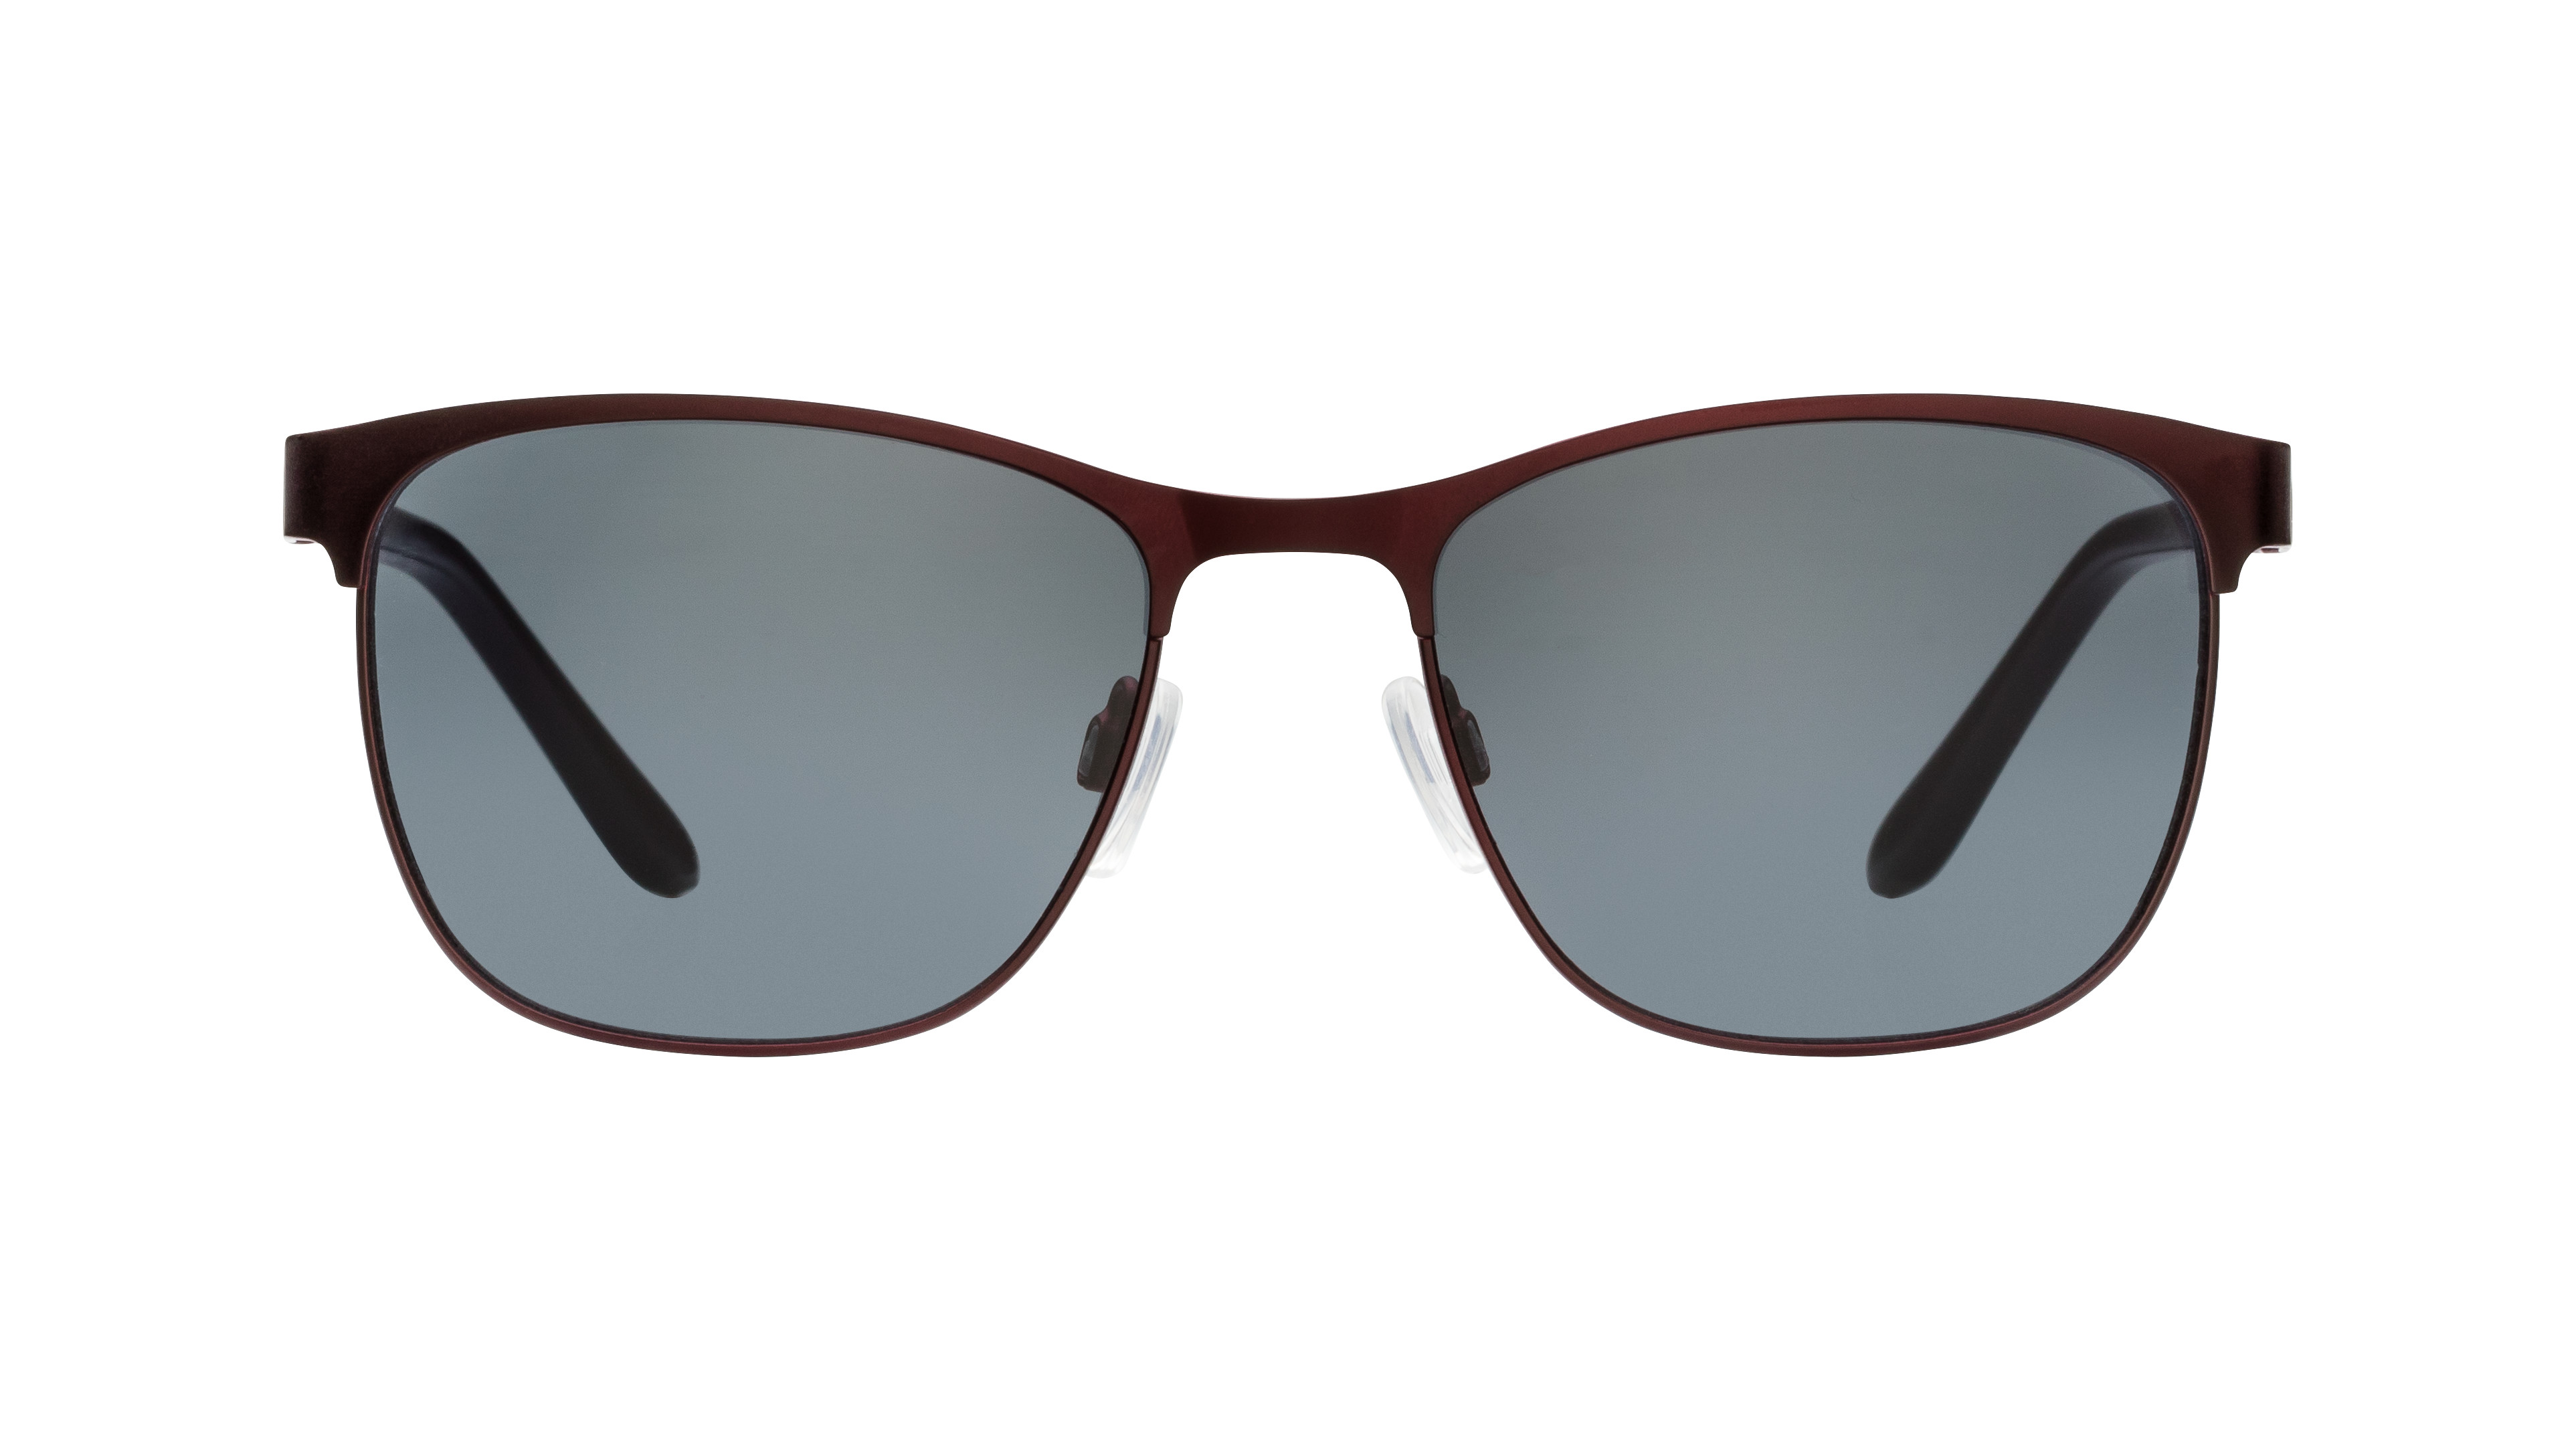 [products.image.front] HUMPHREY´S eyewear 585237 50 Sonnenbrille